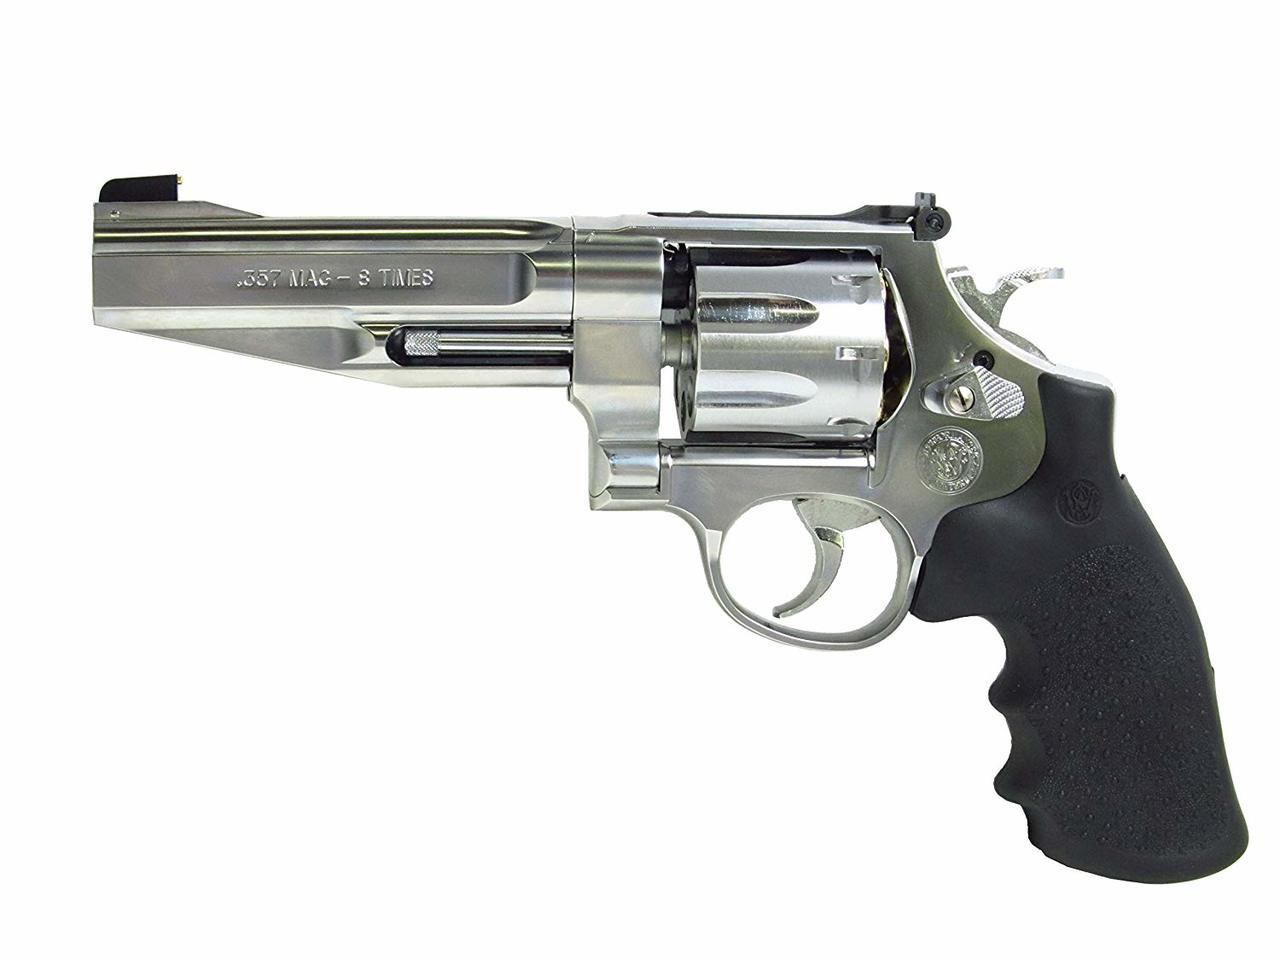 Muzzle left of Tanaka S&W M627 5 inch Eight Shot Stainless Steel Finish Version 2 Gas Revolver Airsoft Gun